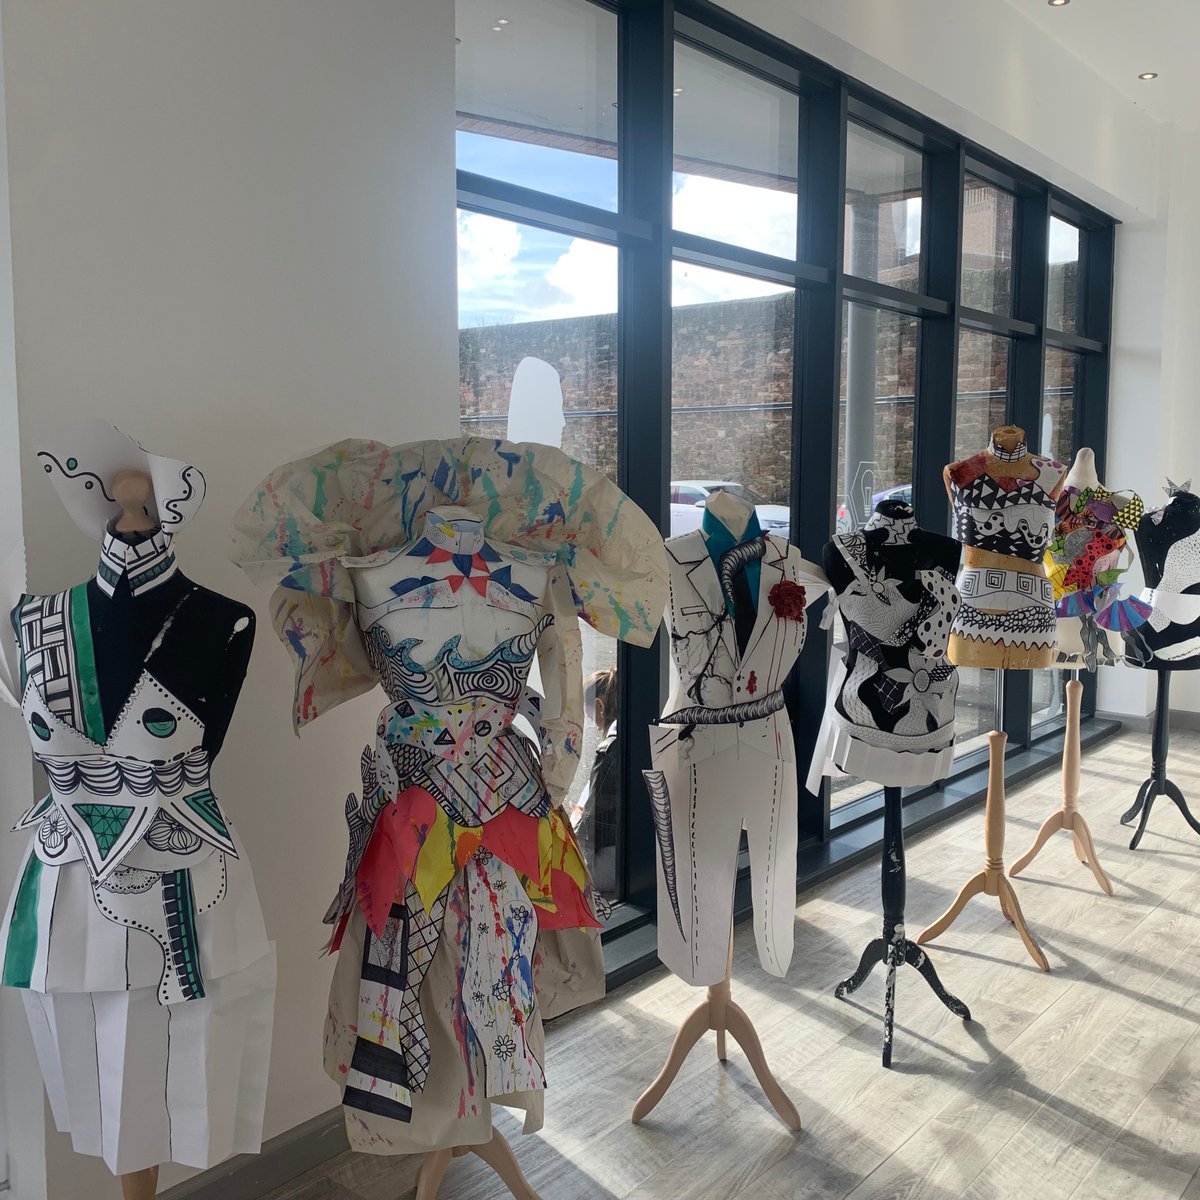 Check out these amazing costume designs on display at our Twelve Quays campus, created by our Level 3 Art and Design students. For more information about our UAL Art and Design Extended Diploma course visit wmc.ac.uk/courses/art-de…